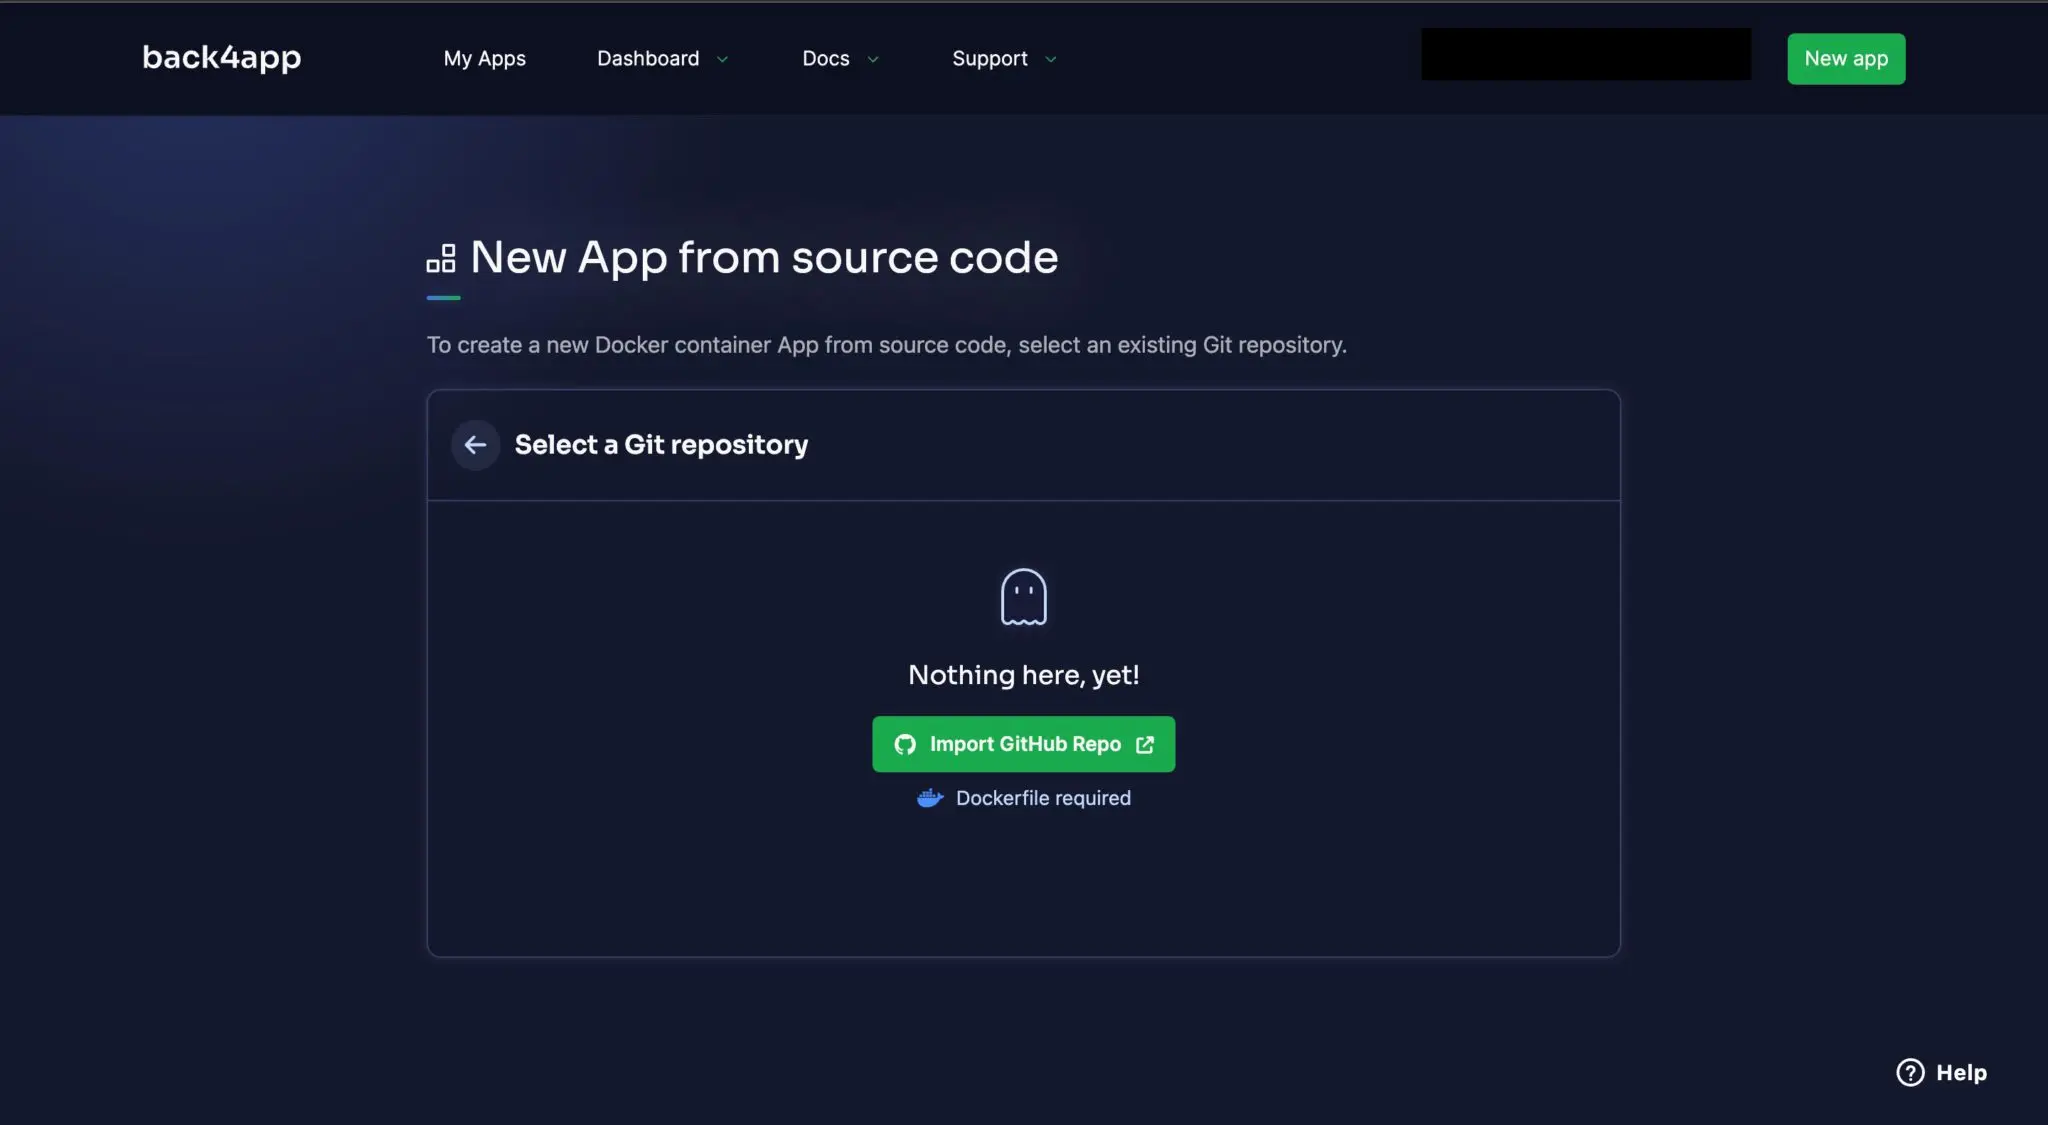 Configure your GitHub account to grant Back4app access to import a repo